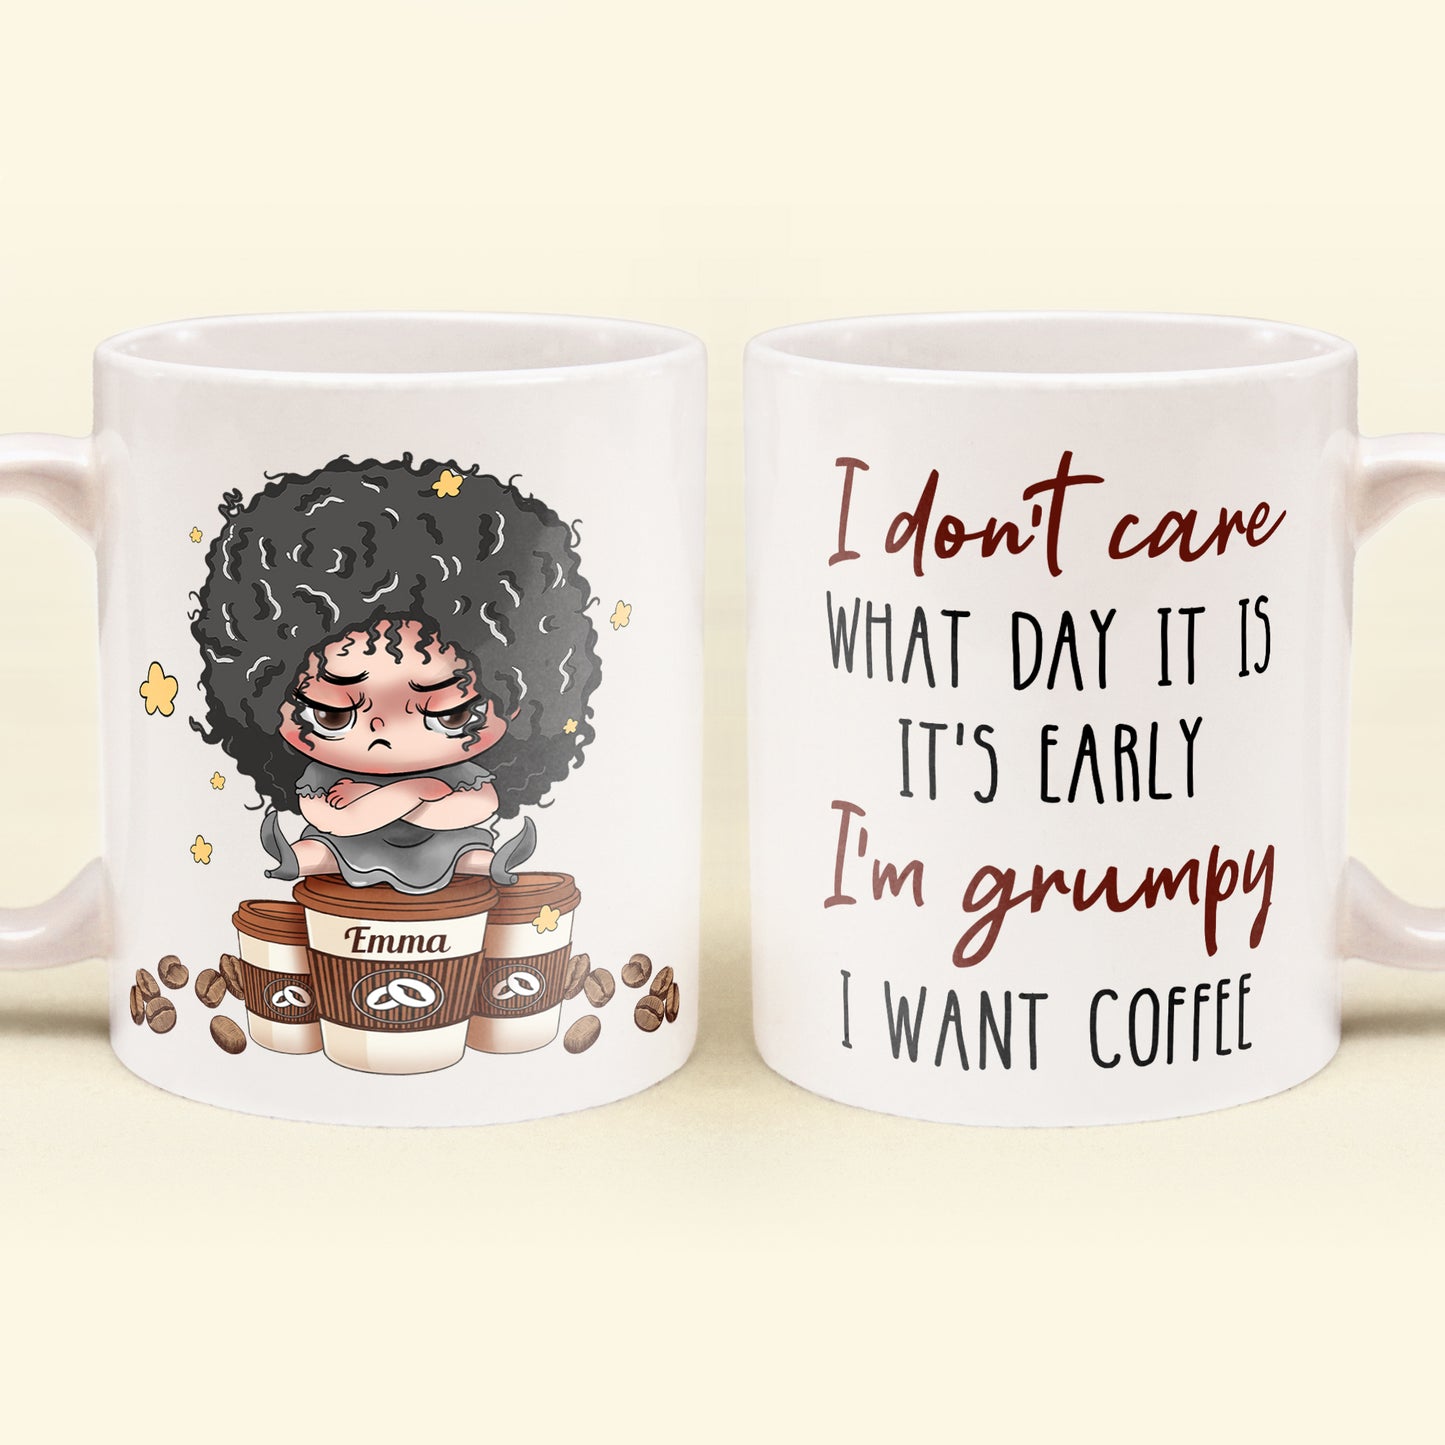 It's Early I'm Grumpy I Want Coffee - Personalized Mug - Birthday Gift, Funny Gift For Coffee Lovers